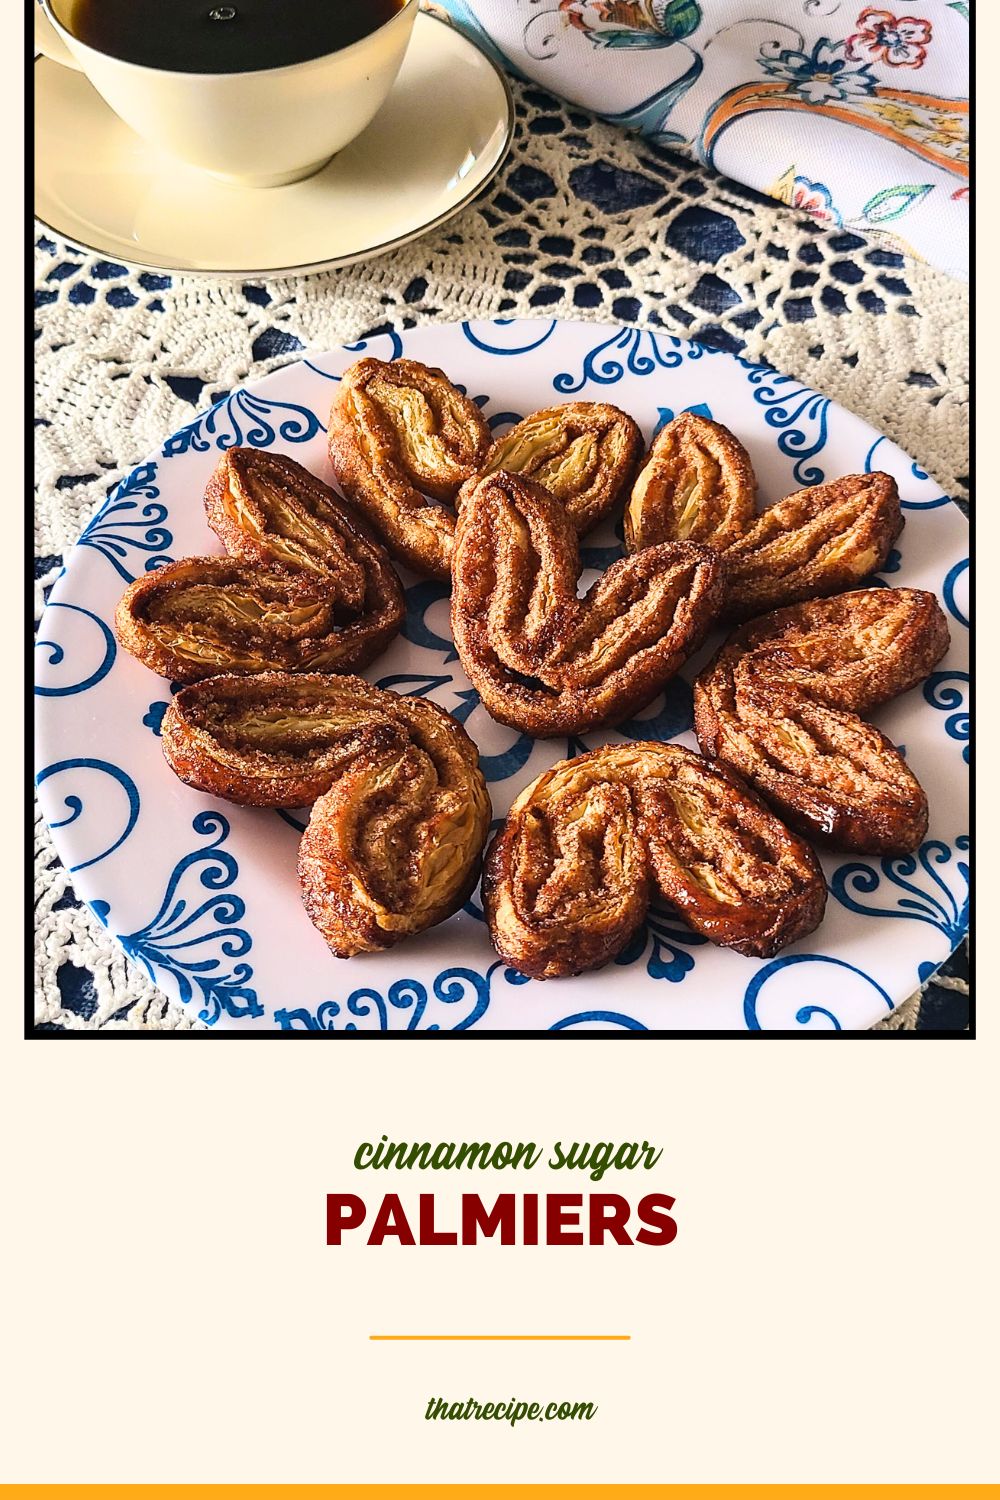 palmiers on a plate with text "cinnamon sugar palmiers"